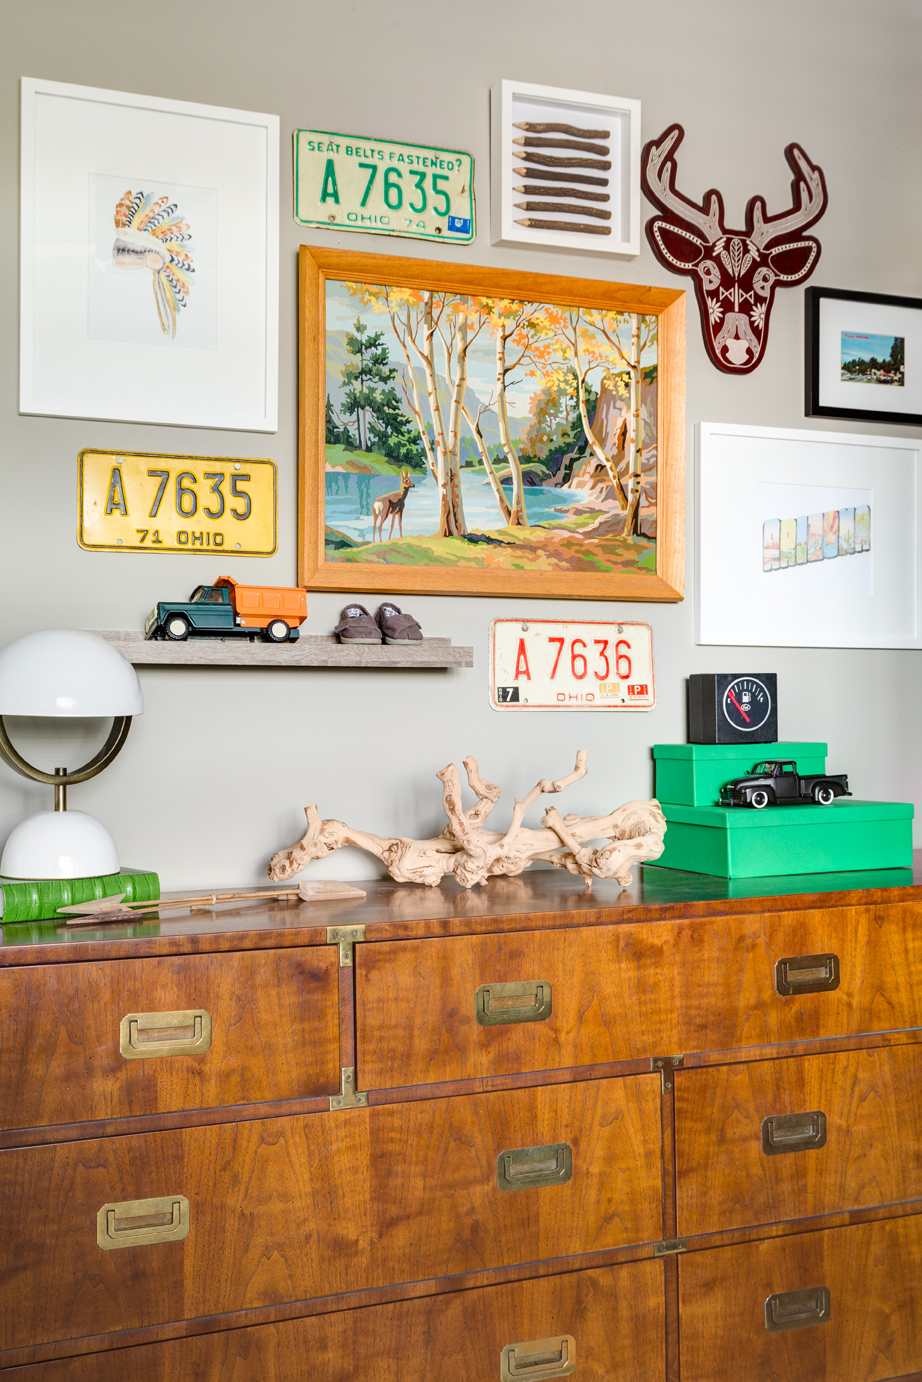 Vintage Campaign Dresser and Gallery Wall